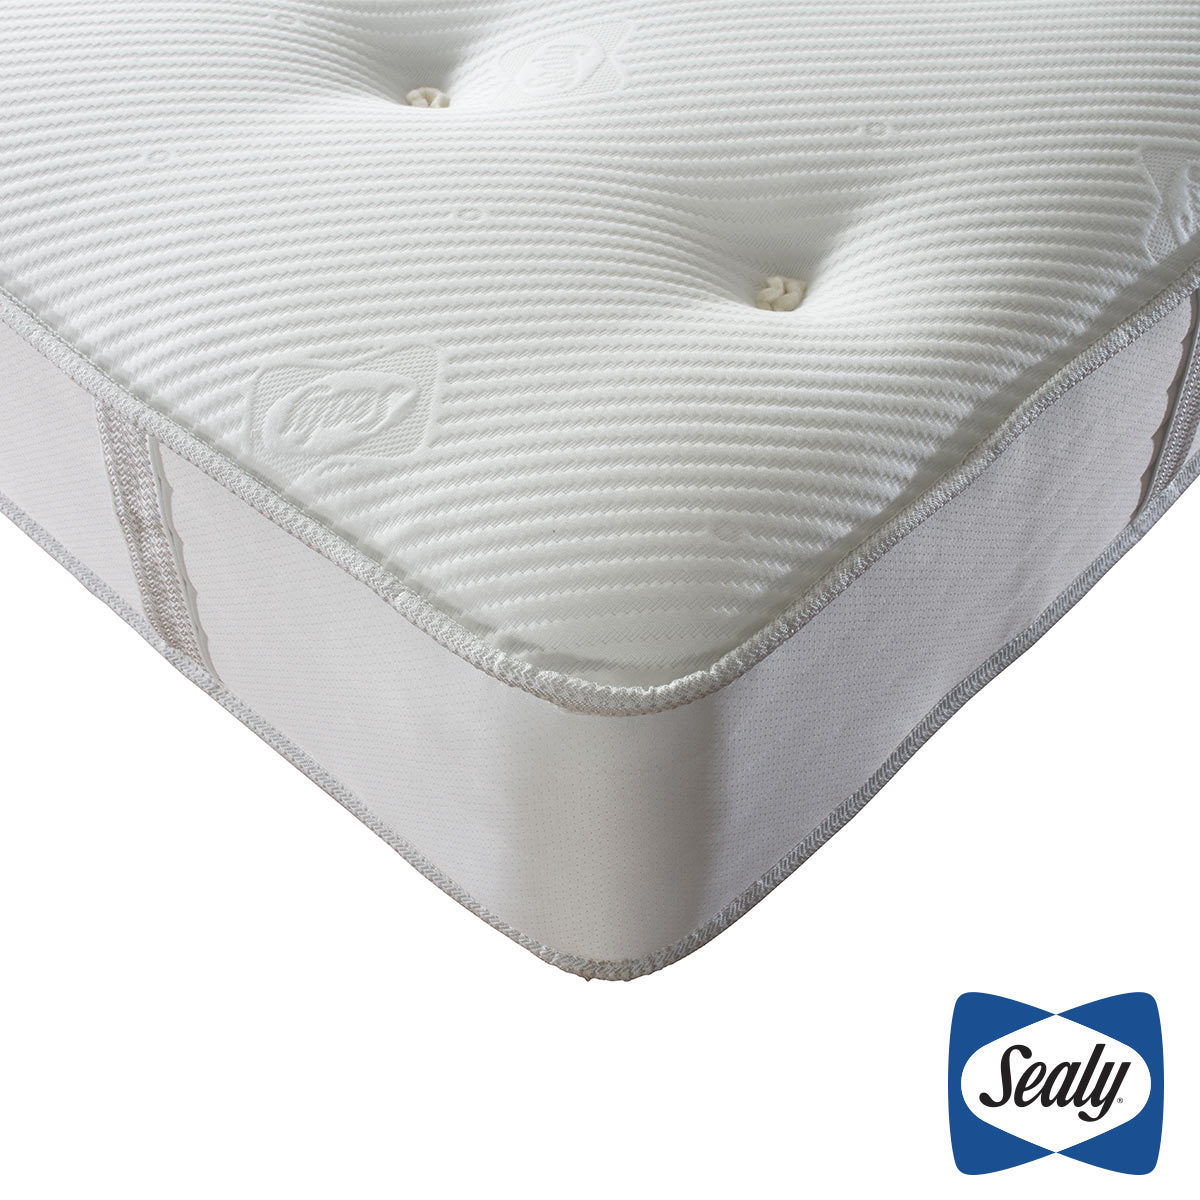 Sealy 1000 Deluxe Pocket Memory Tufted Mattress, Super King